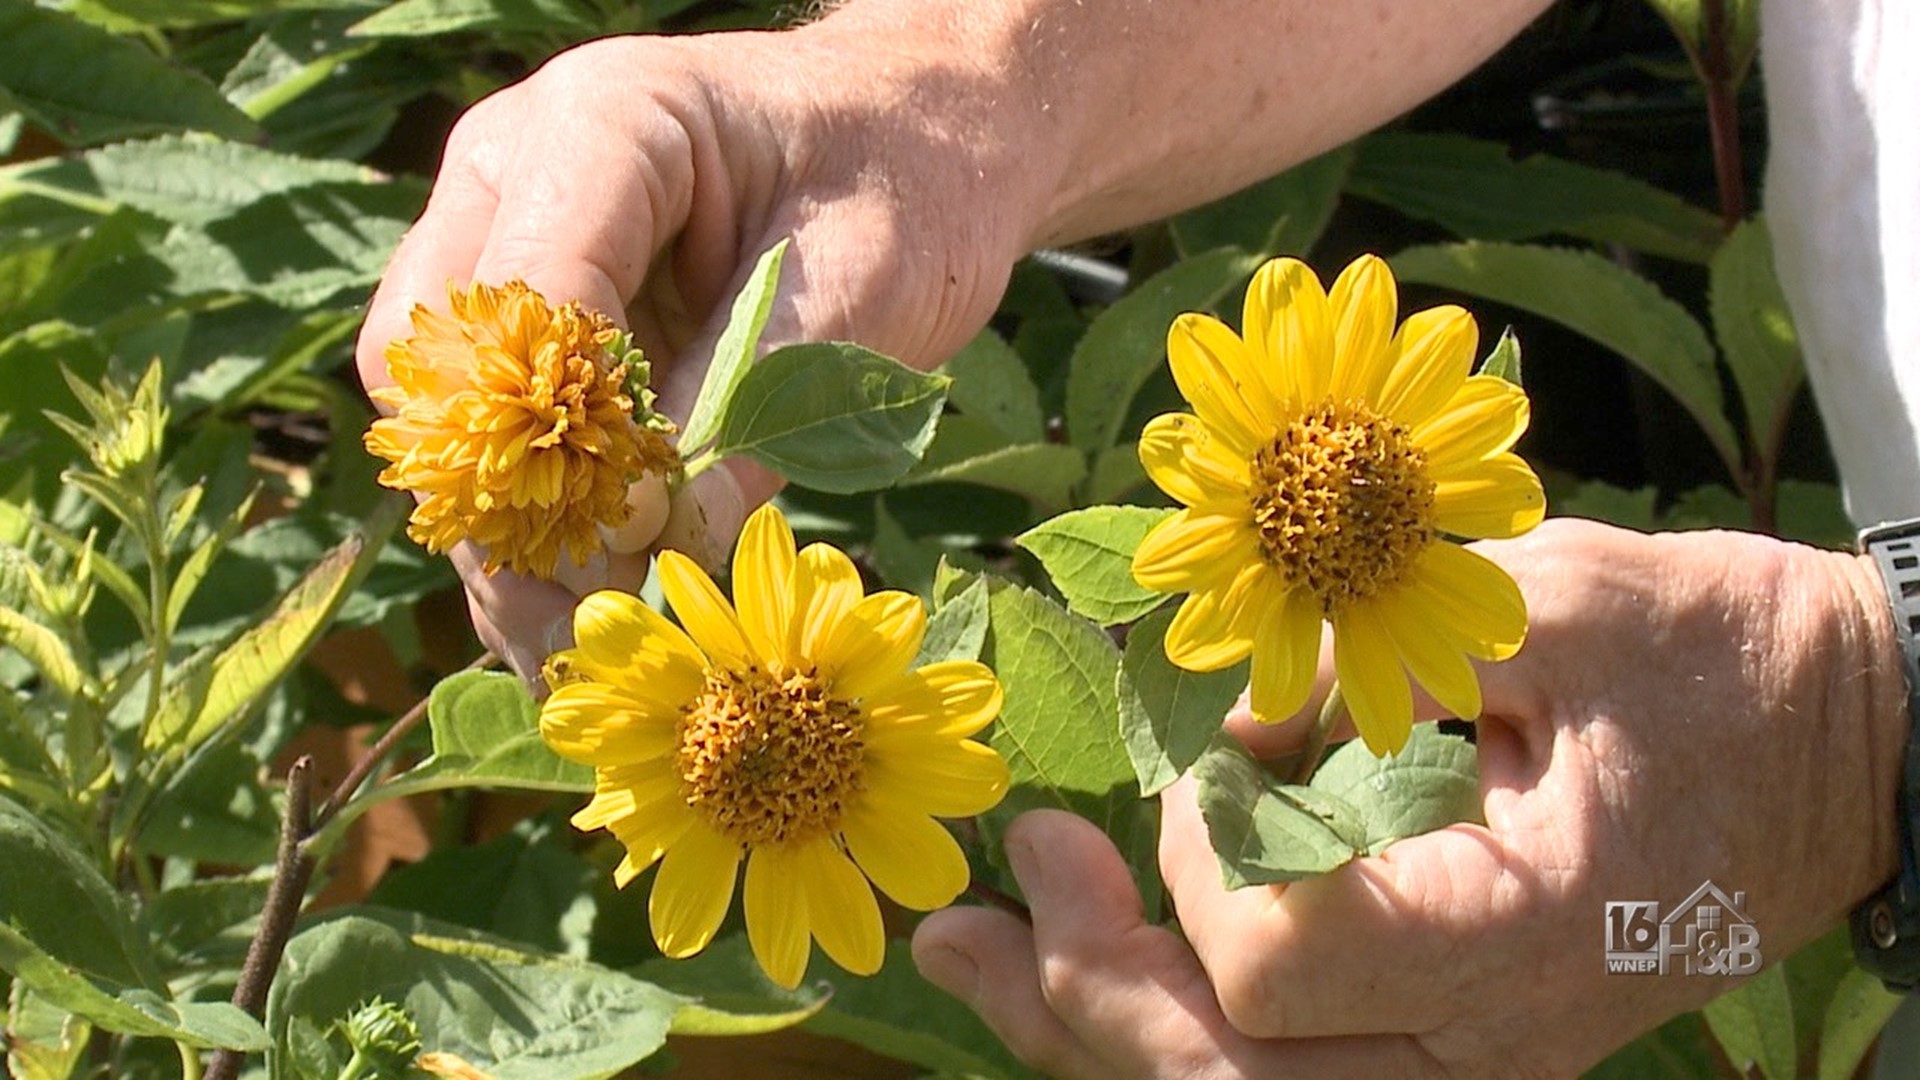 Your Favorite Late Summer Yellow Blooms Are Here!